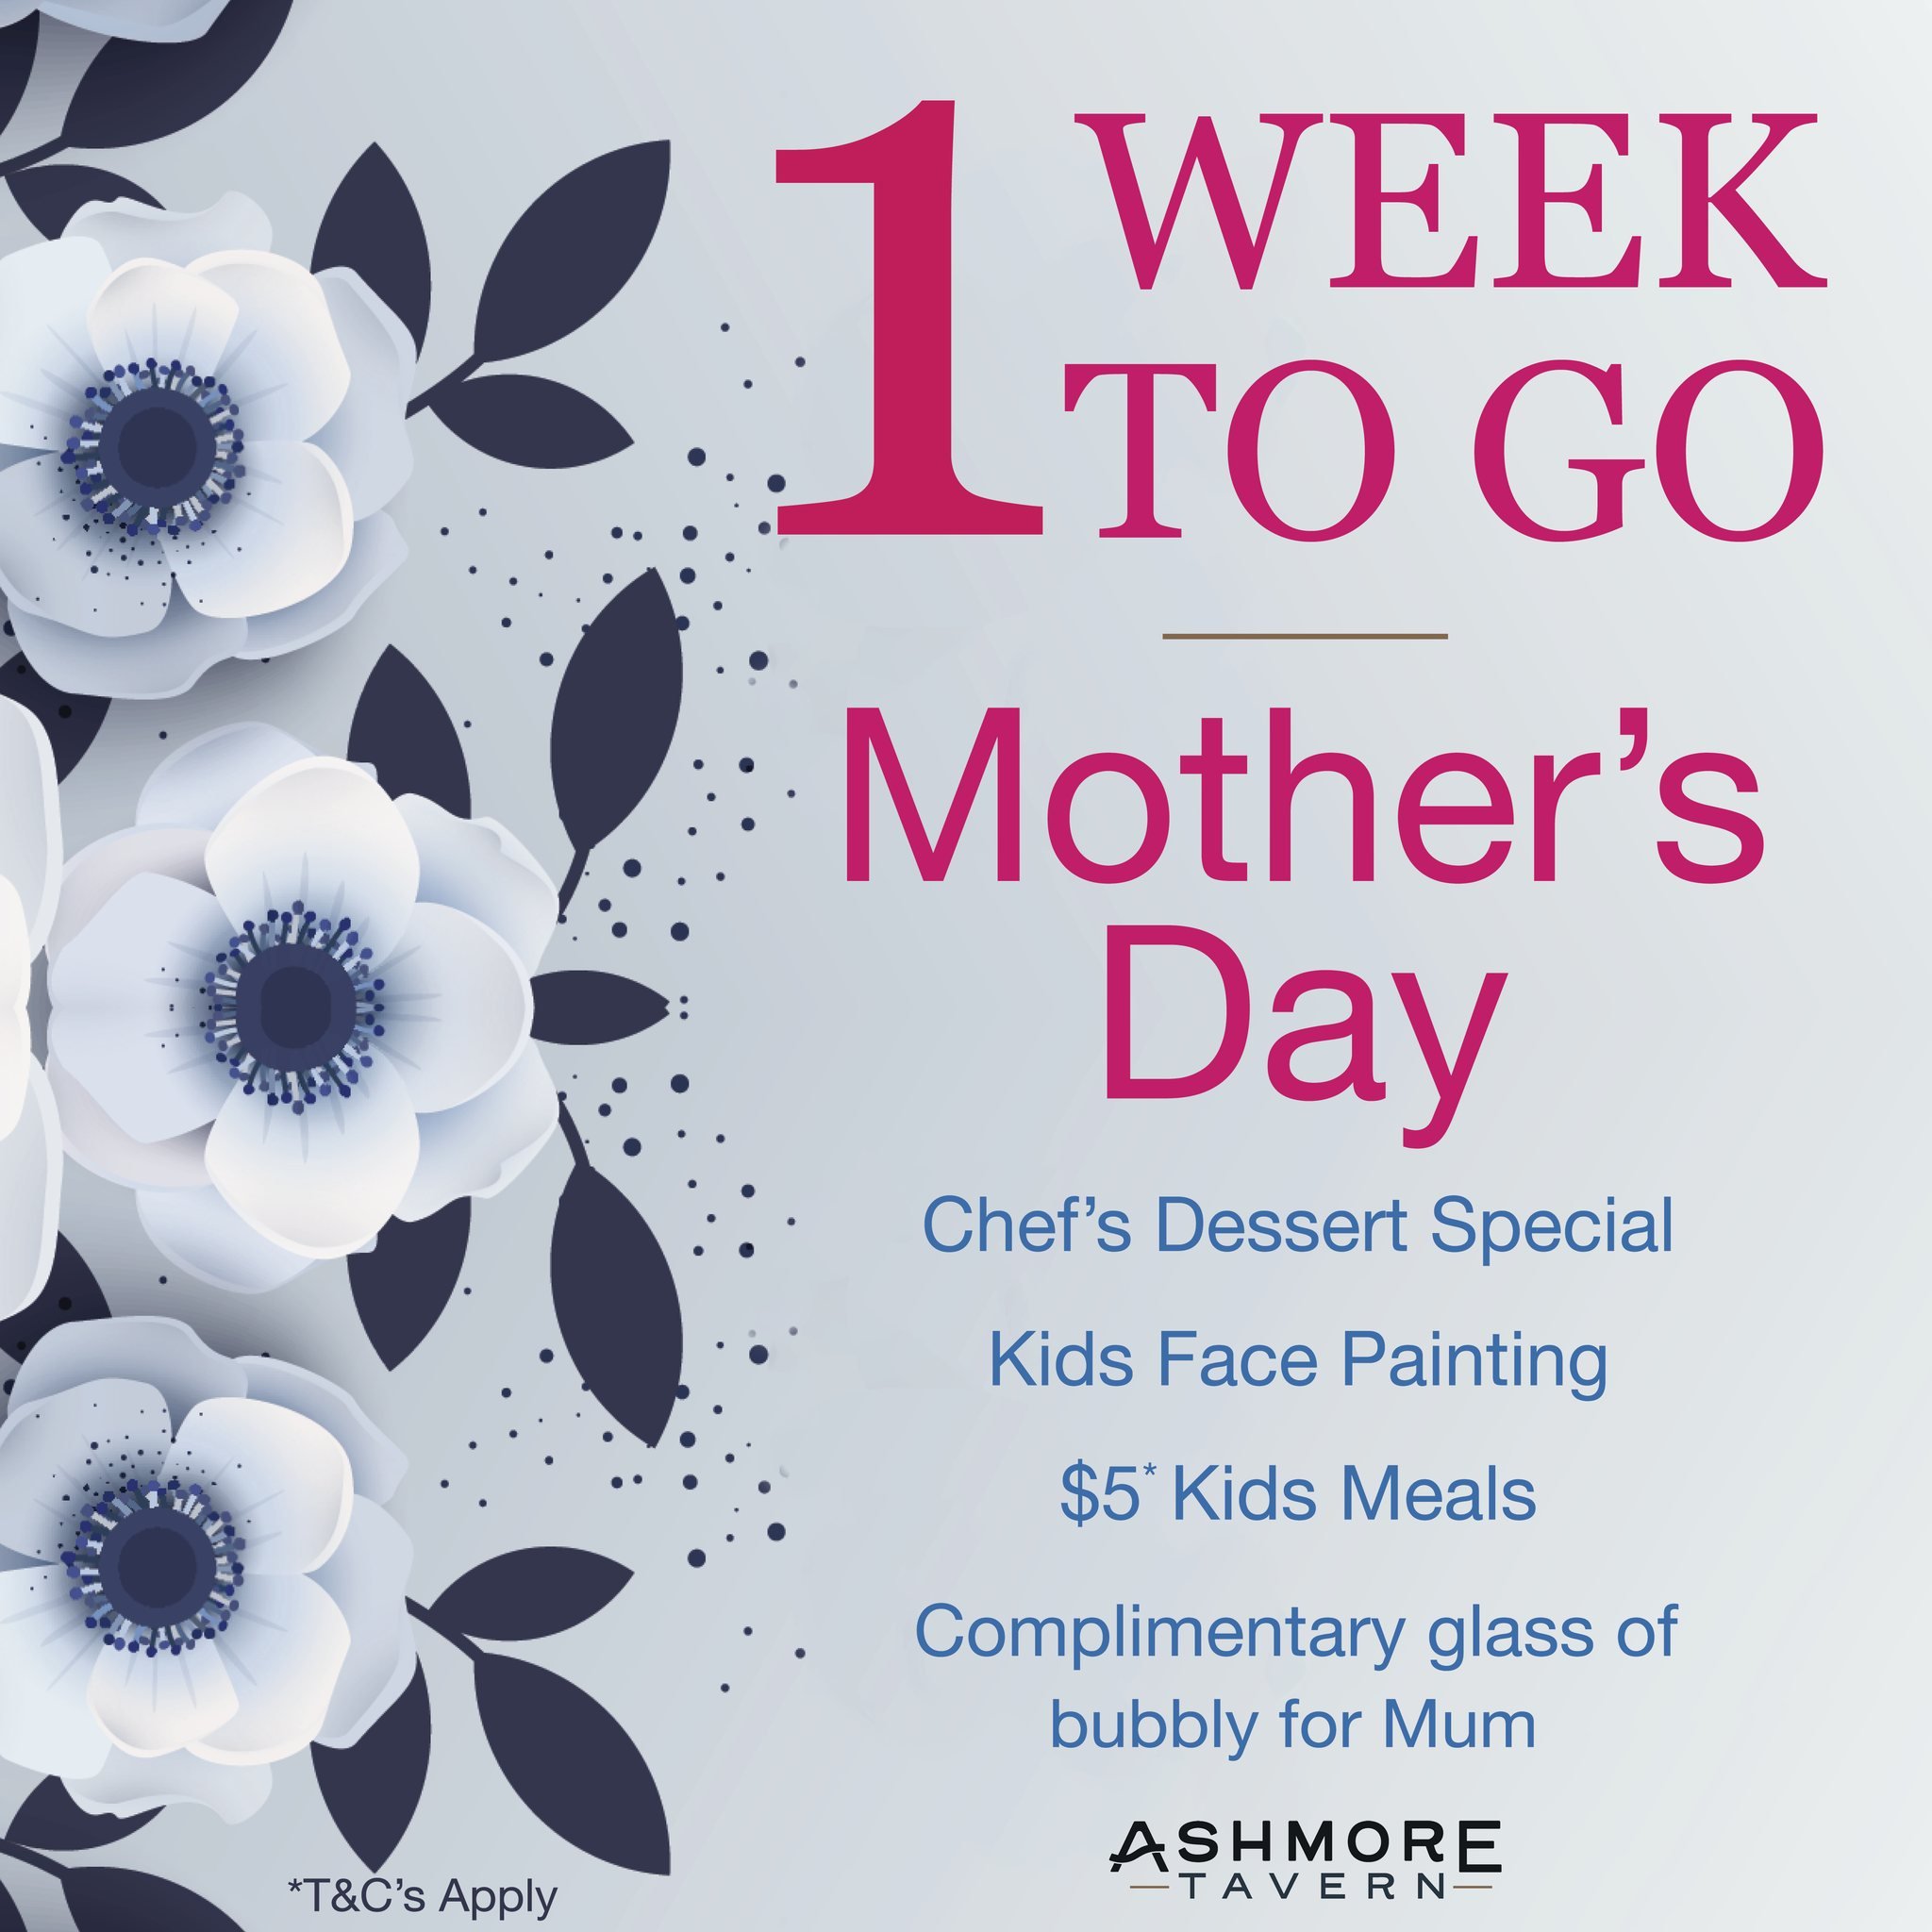 Just 1 week to go until Mother's Day! 🌸 

Show Mum some love with a delightful outing at Ashmore Tavern. Enjoy our chef&rsquo;s dessert special, kids face painting, $5* kids meals, and a complimentary glass of bubbly for Mum.

Book your table today 